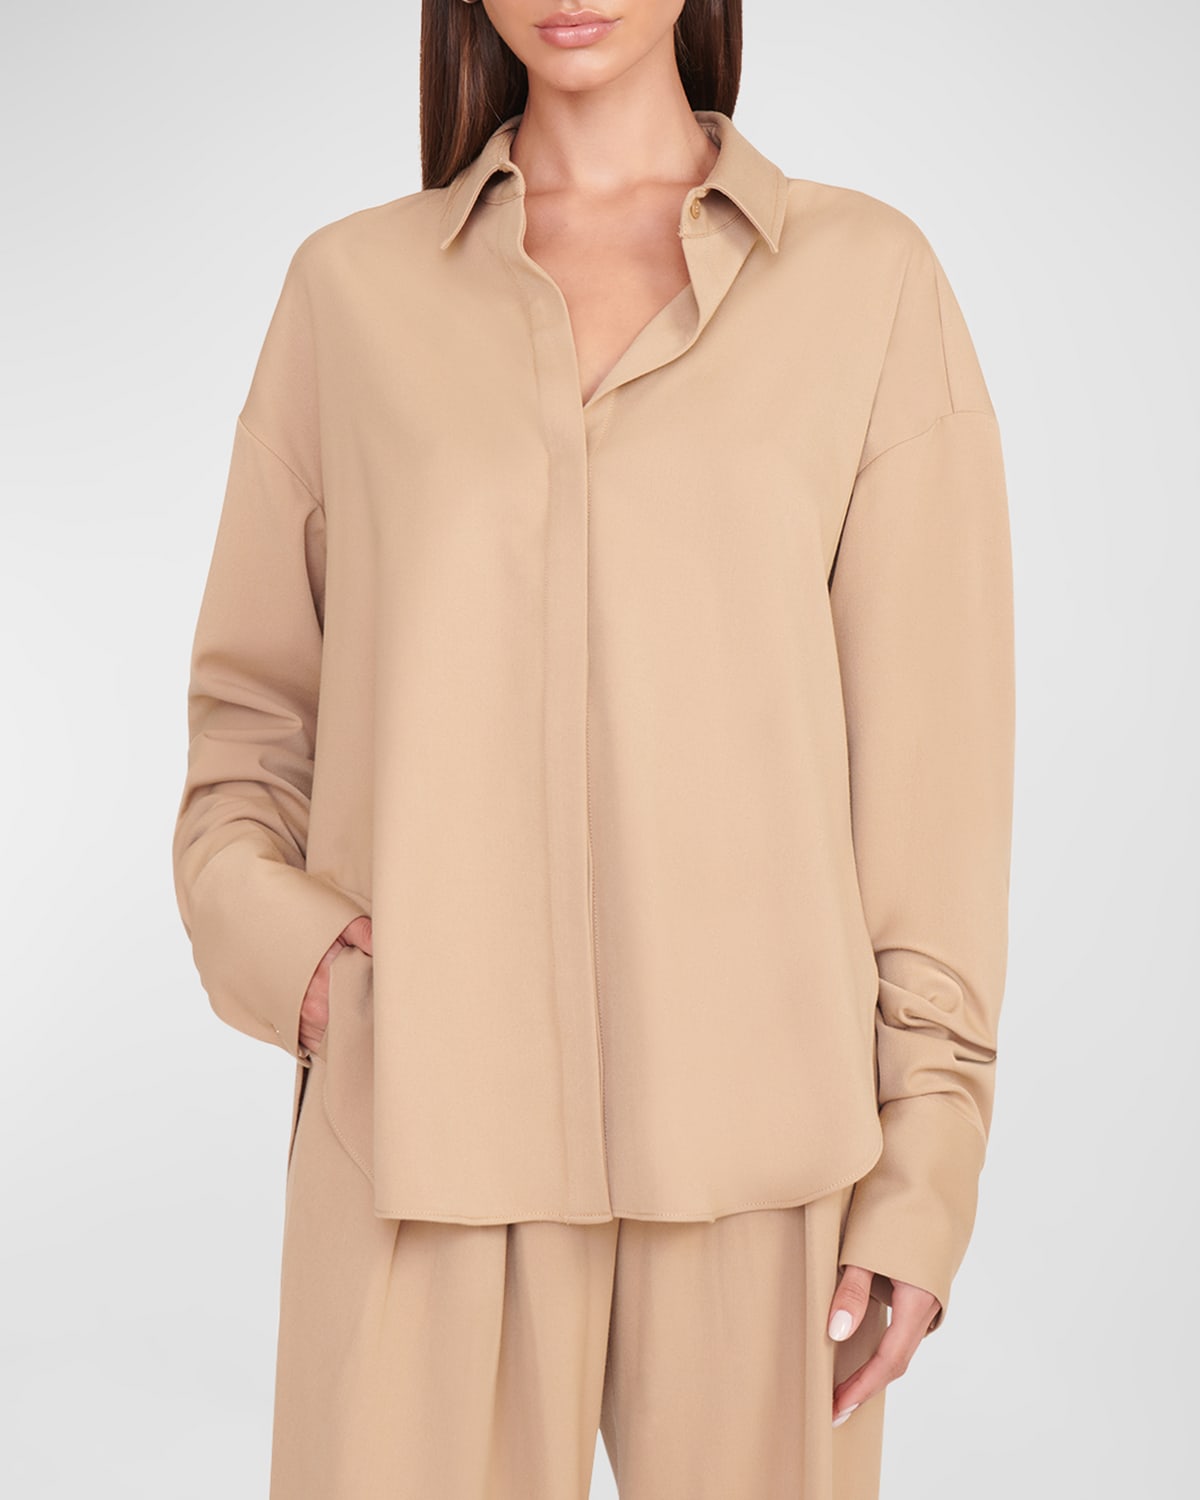 STAUD COLTON OVERSIZED BUTTON-FRONT SHIRT